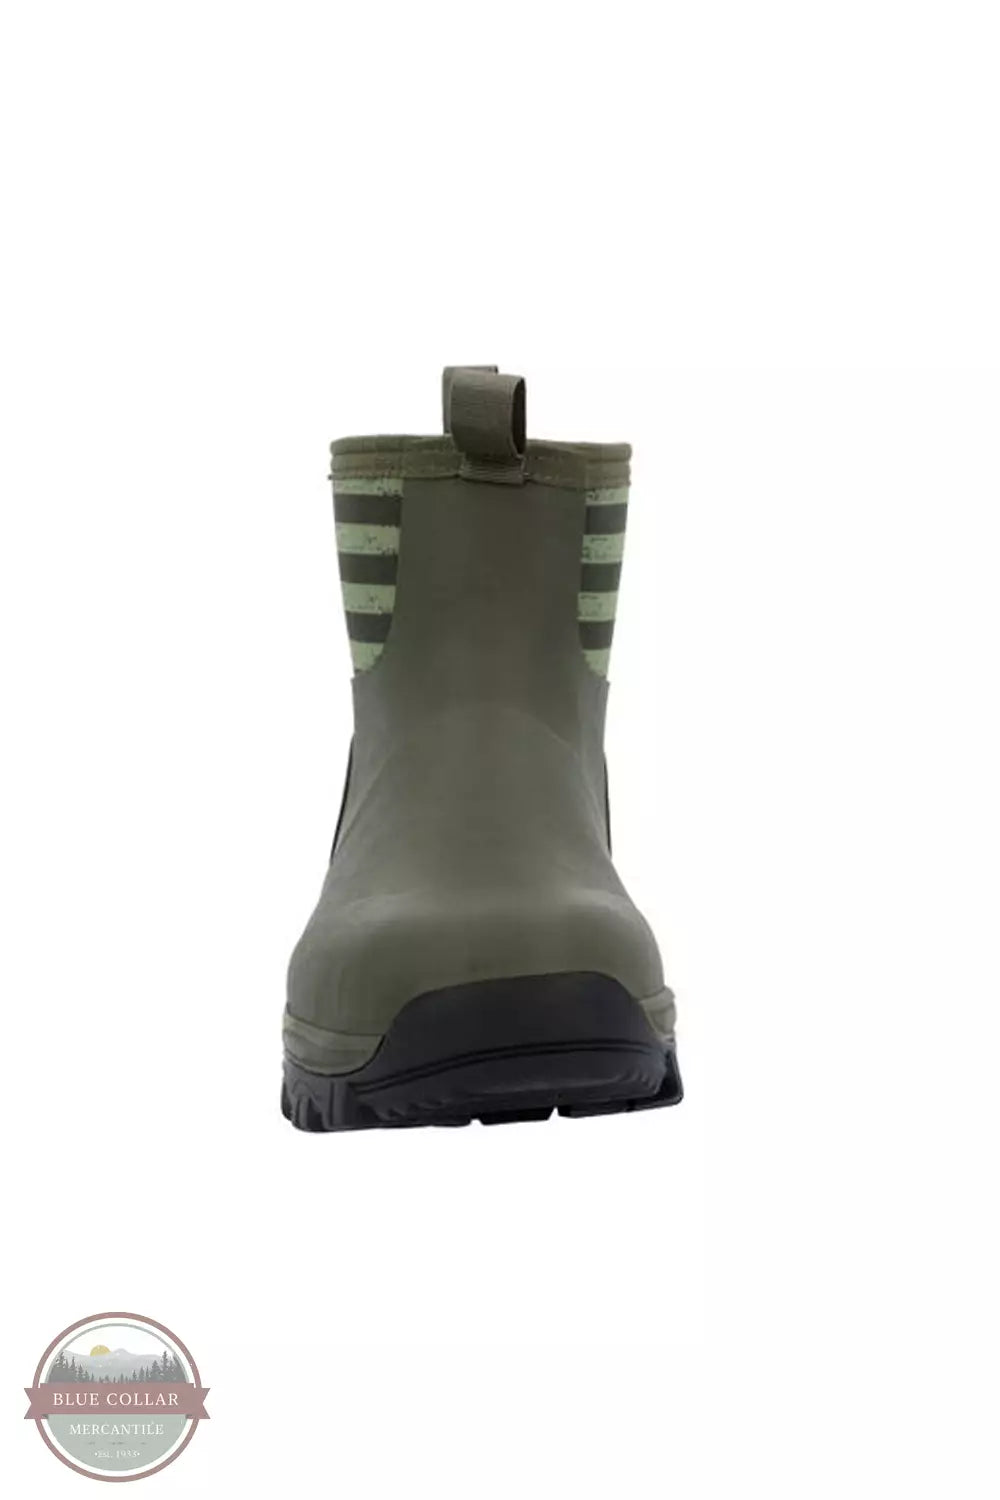 Georgia GB00631 GBR Mid Rubber Boots in Dark Green Front View